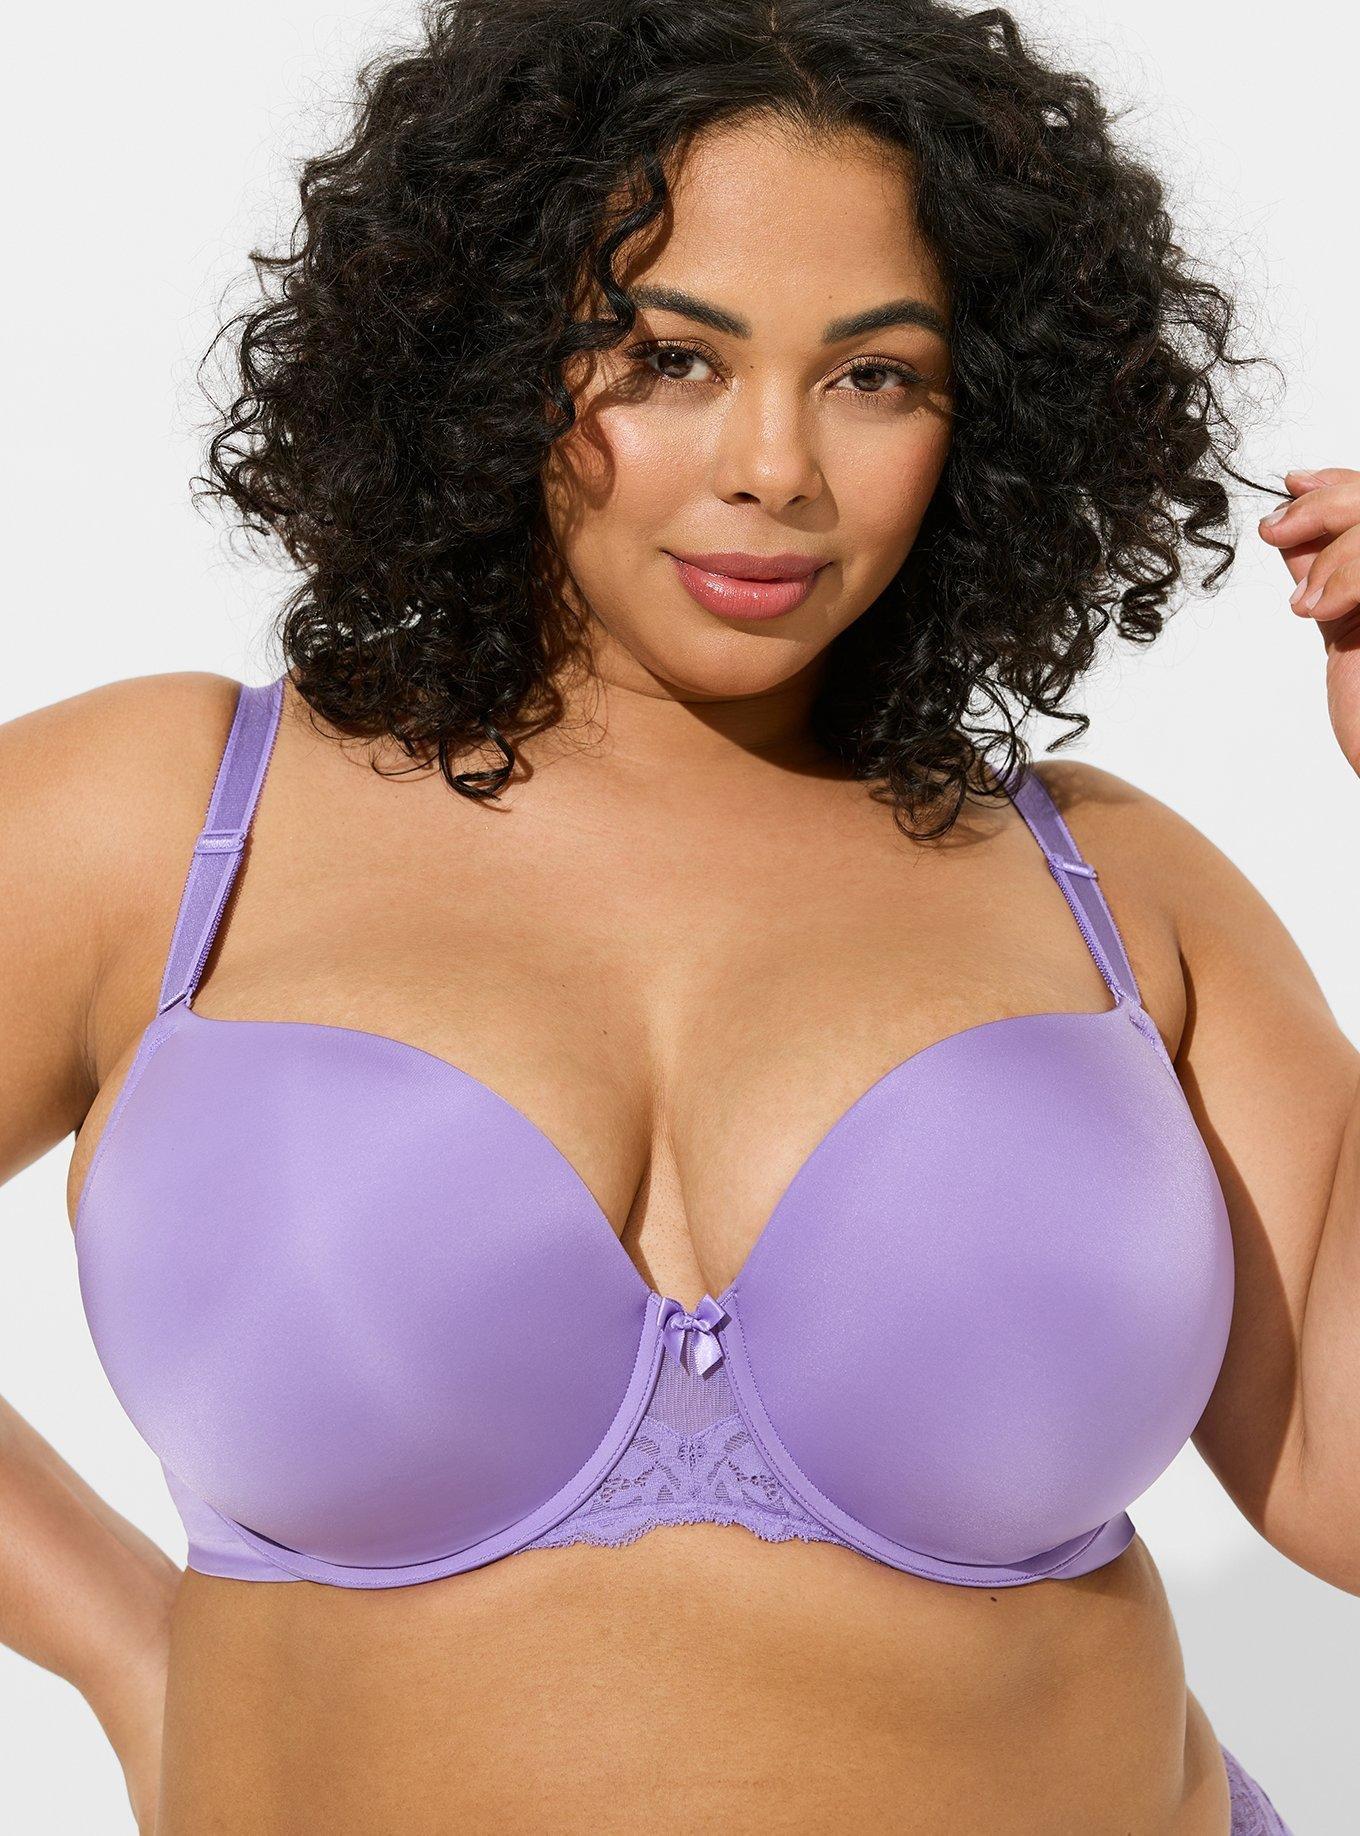 44DD-Sized Shoppers Call This the “Perfect T-Shirt Bra”